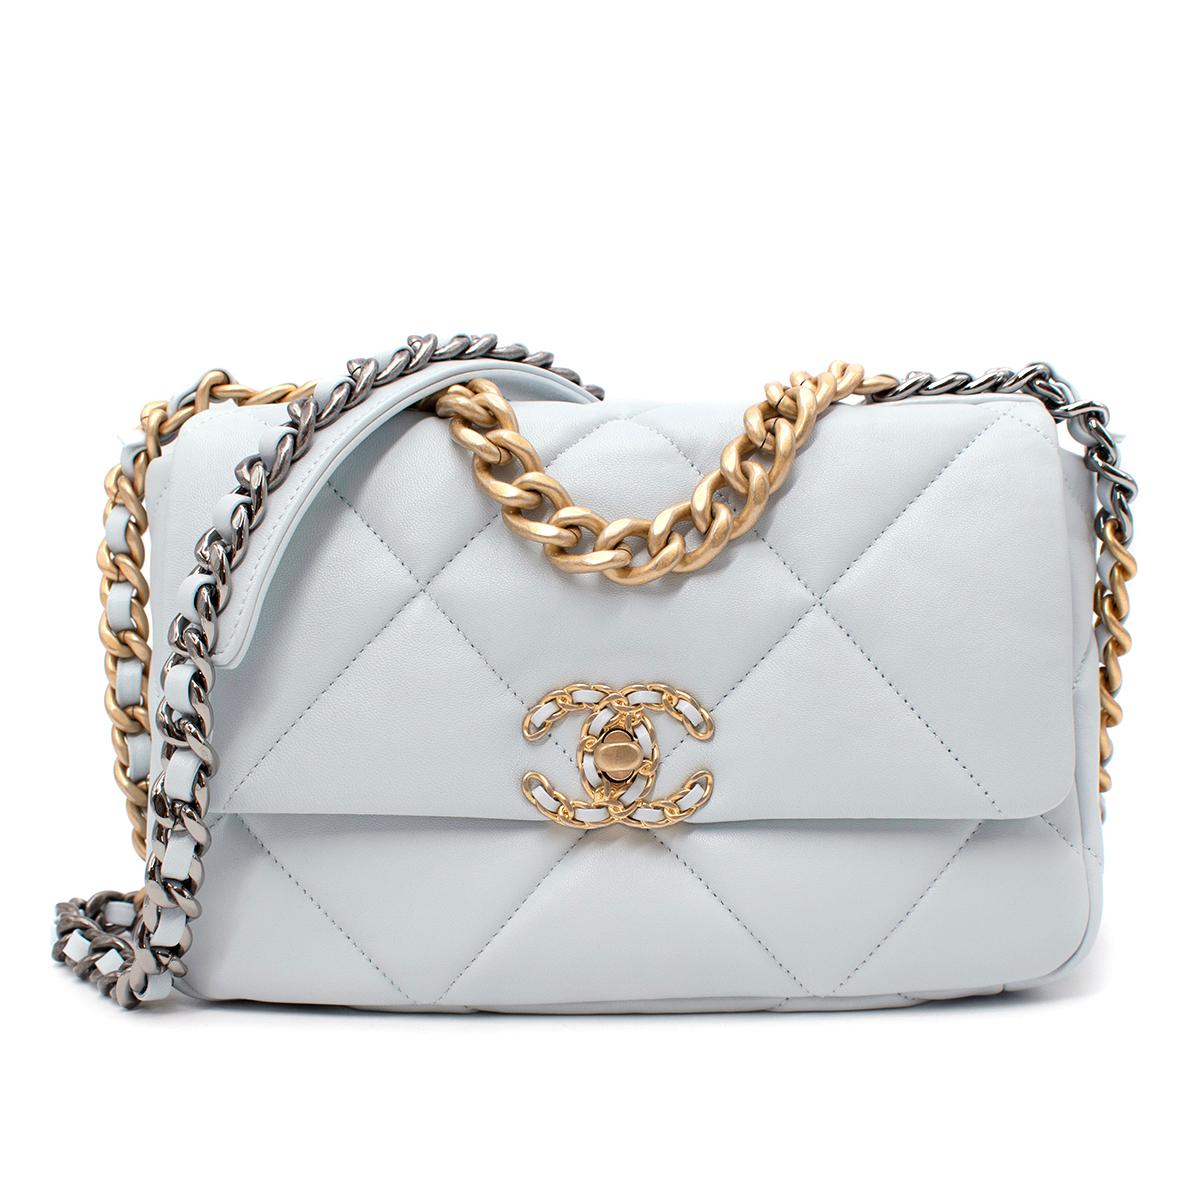 Chanel Powder Blue Quilted Leather Small 19 Shoulder Bag

- Stunning 2021 release in a light powder blue coloured leather, complemented by gold, silver & ruthenium-tone chain strap
- A refreshing update on the classic 2.55 bag, featuring a larger